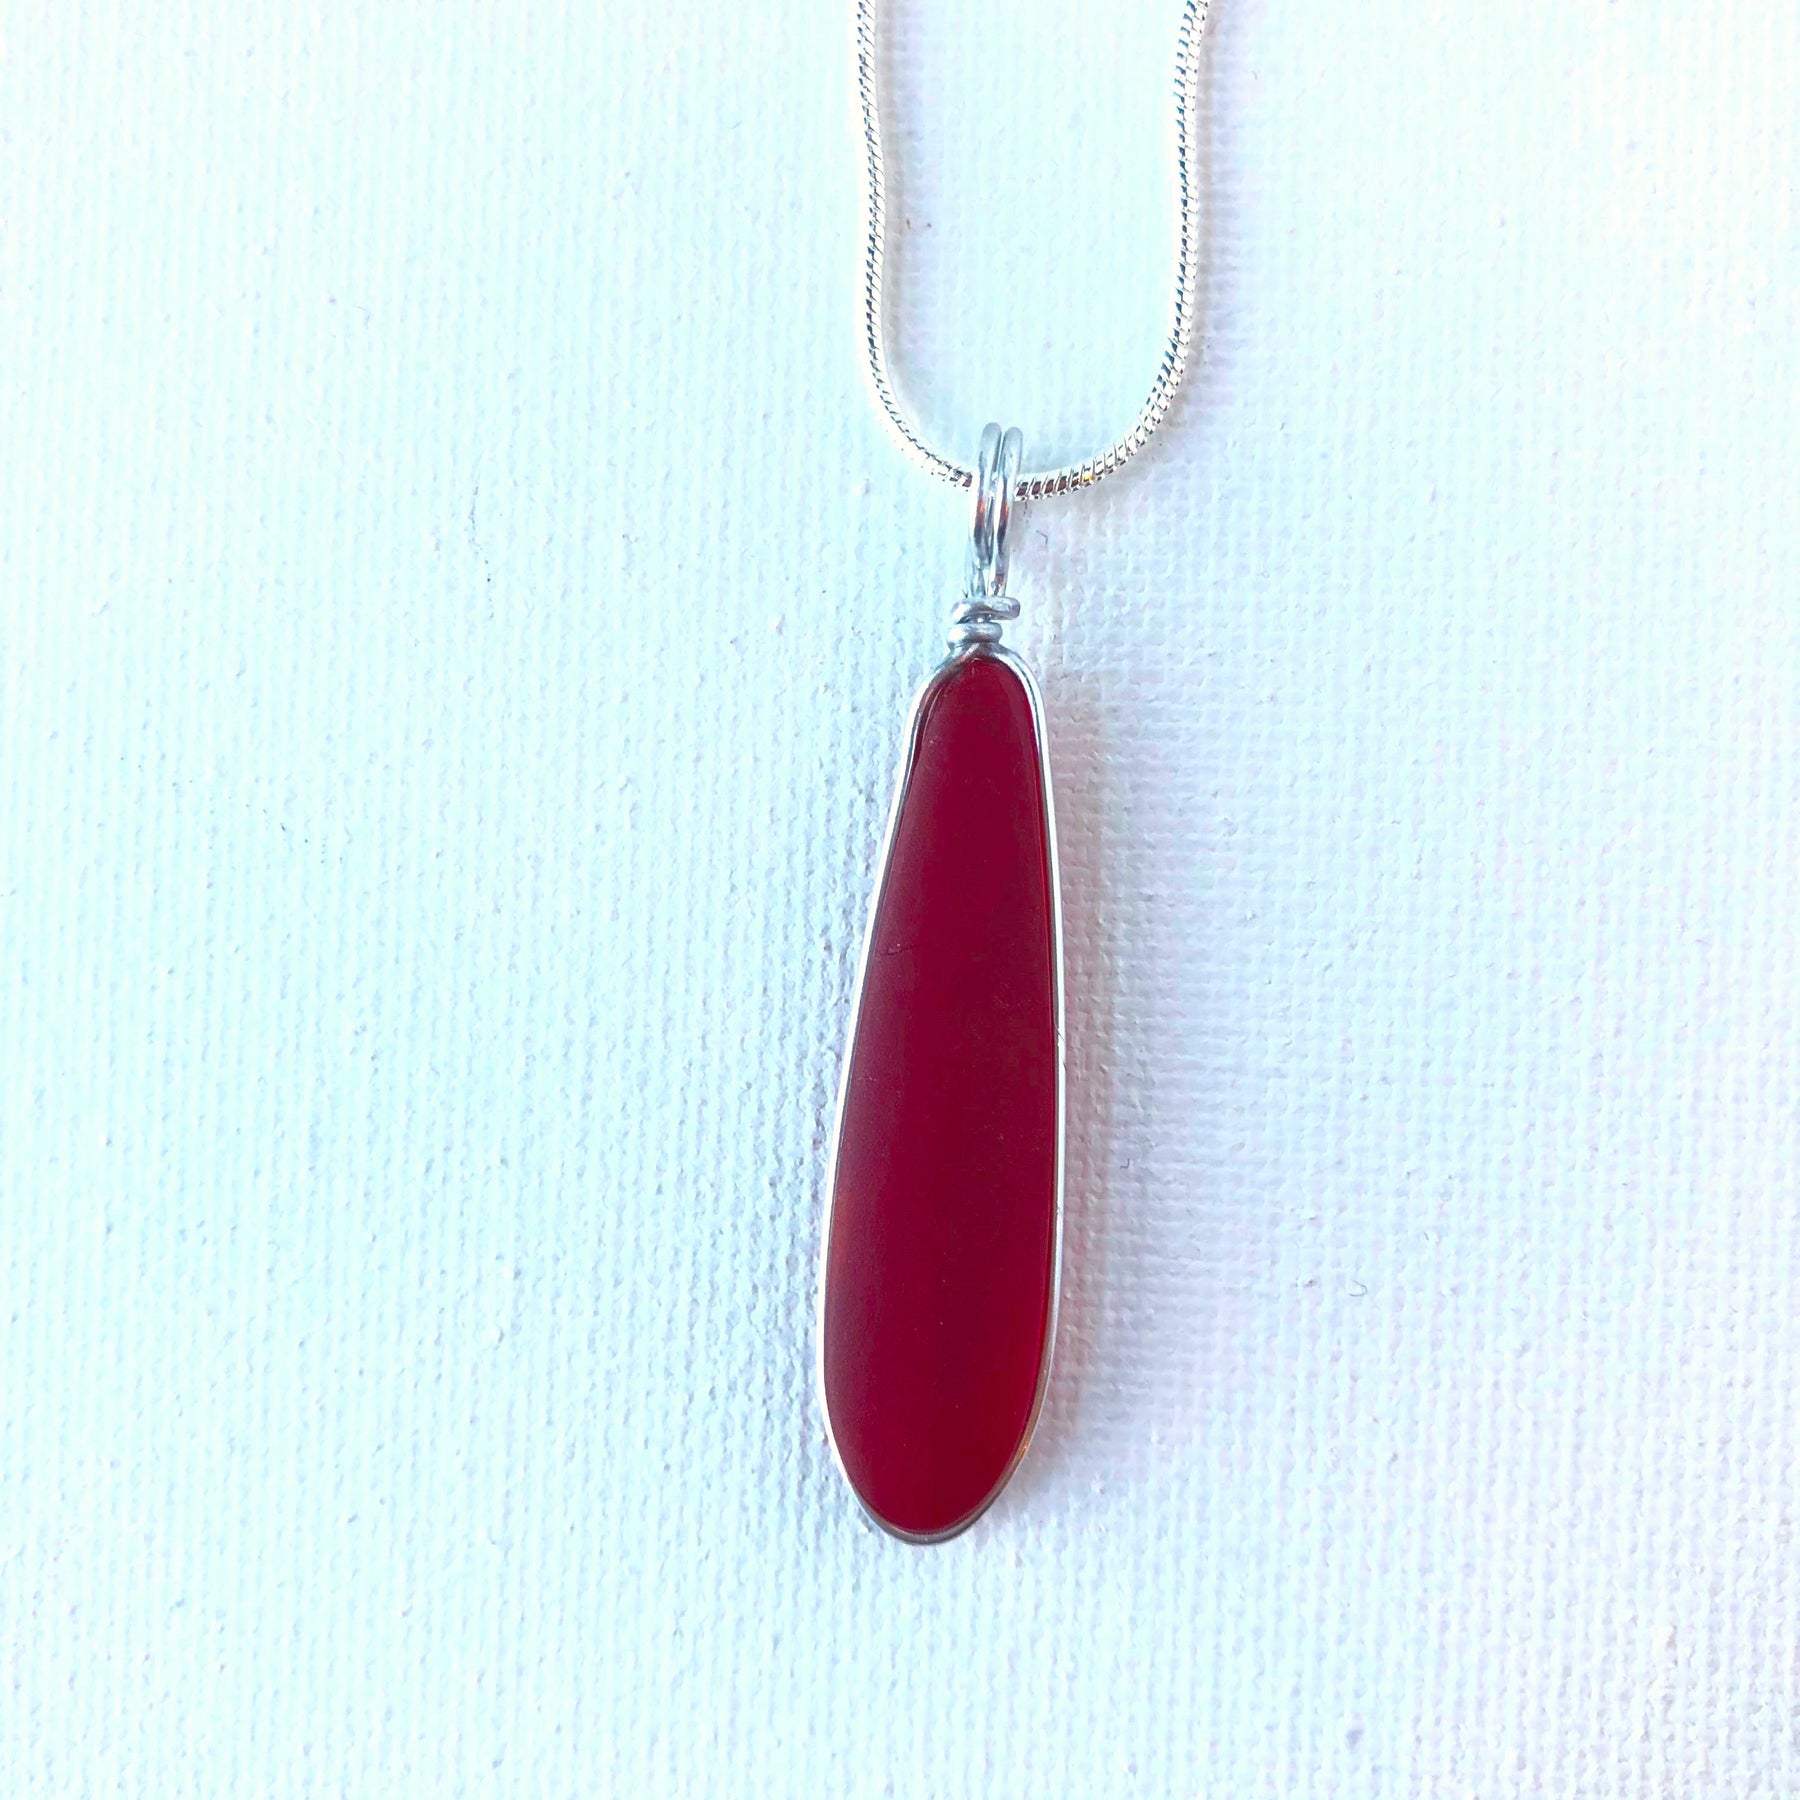 PASSION Red Long Skinny Sea Glass Necklace